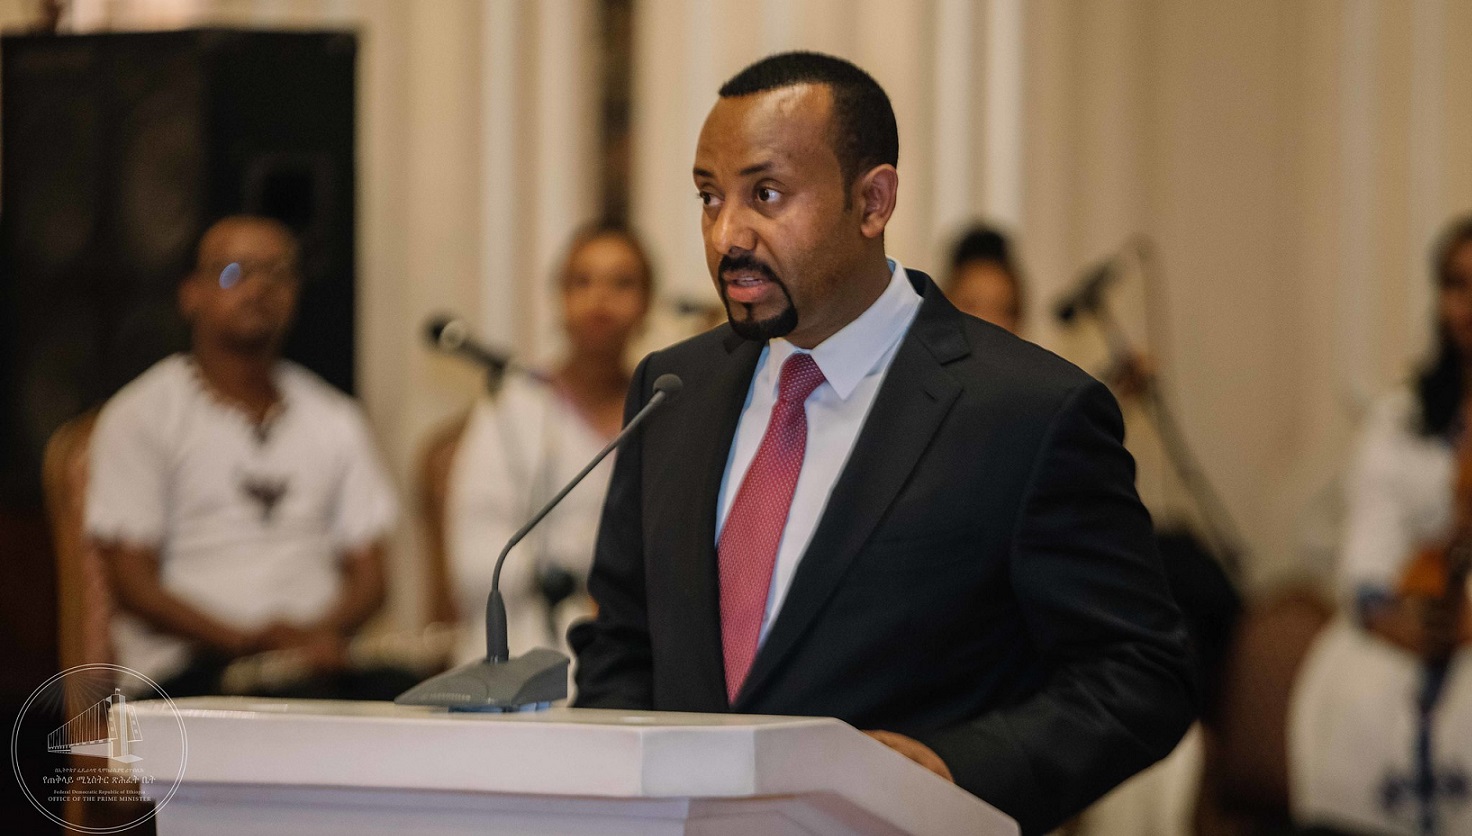 Prime Minister Abiy Ahmed at the African Union. Image credit: Office of the Prime Minister-Ethiopia@Flickr